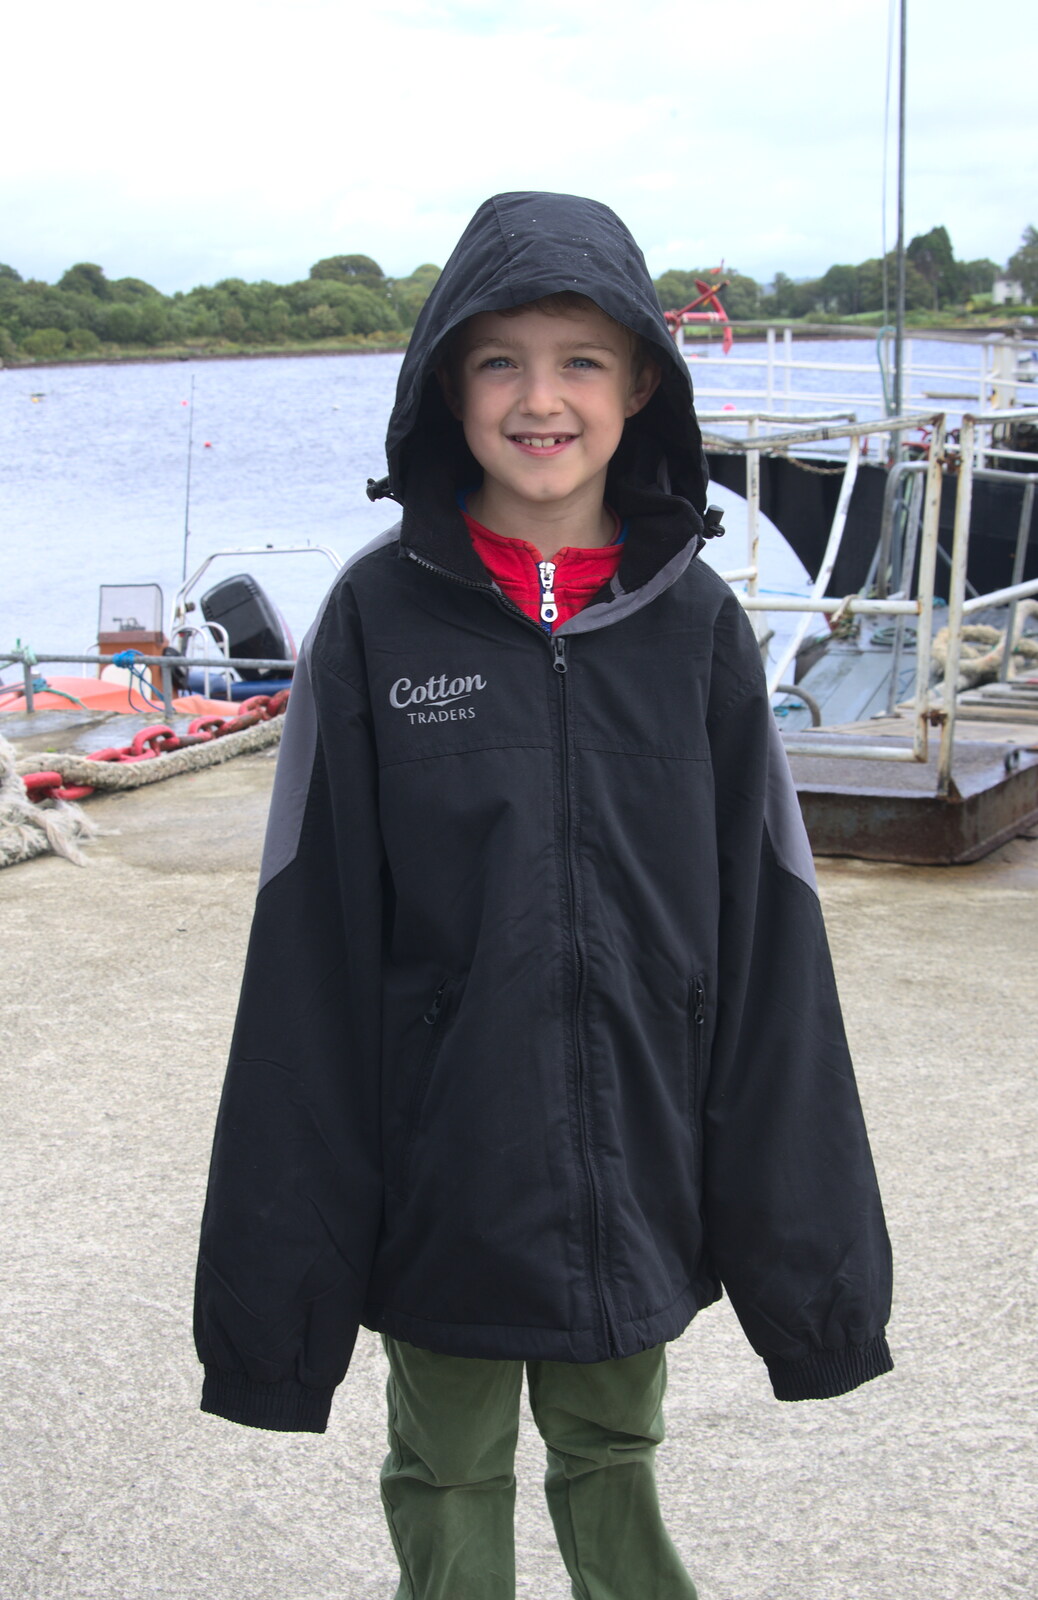 Fred in his over-sized new jacket from A Seafari Boat Trip, Kenmare, Kerry, Ireland - 3rd August 2017